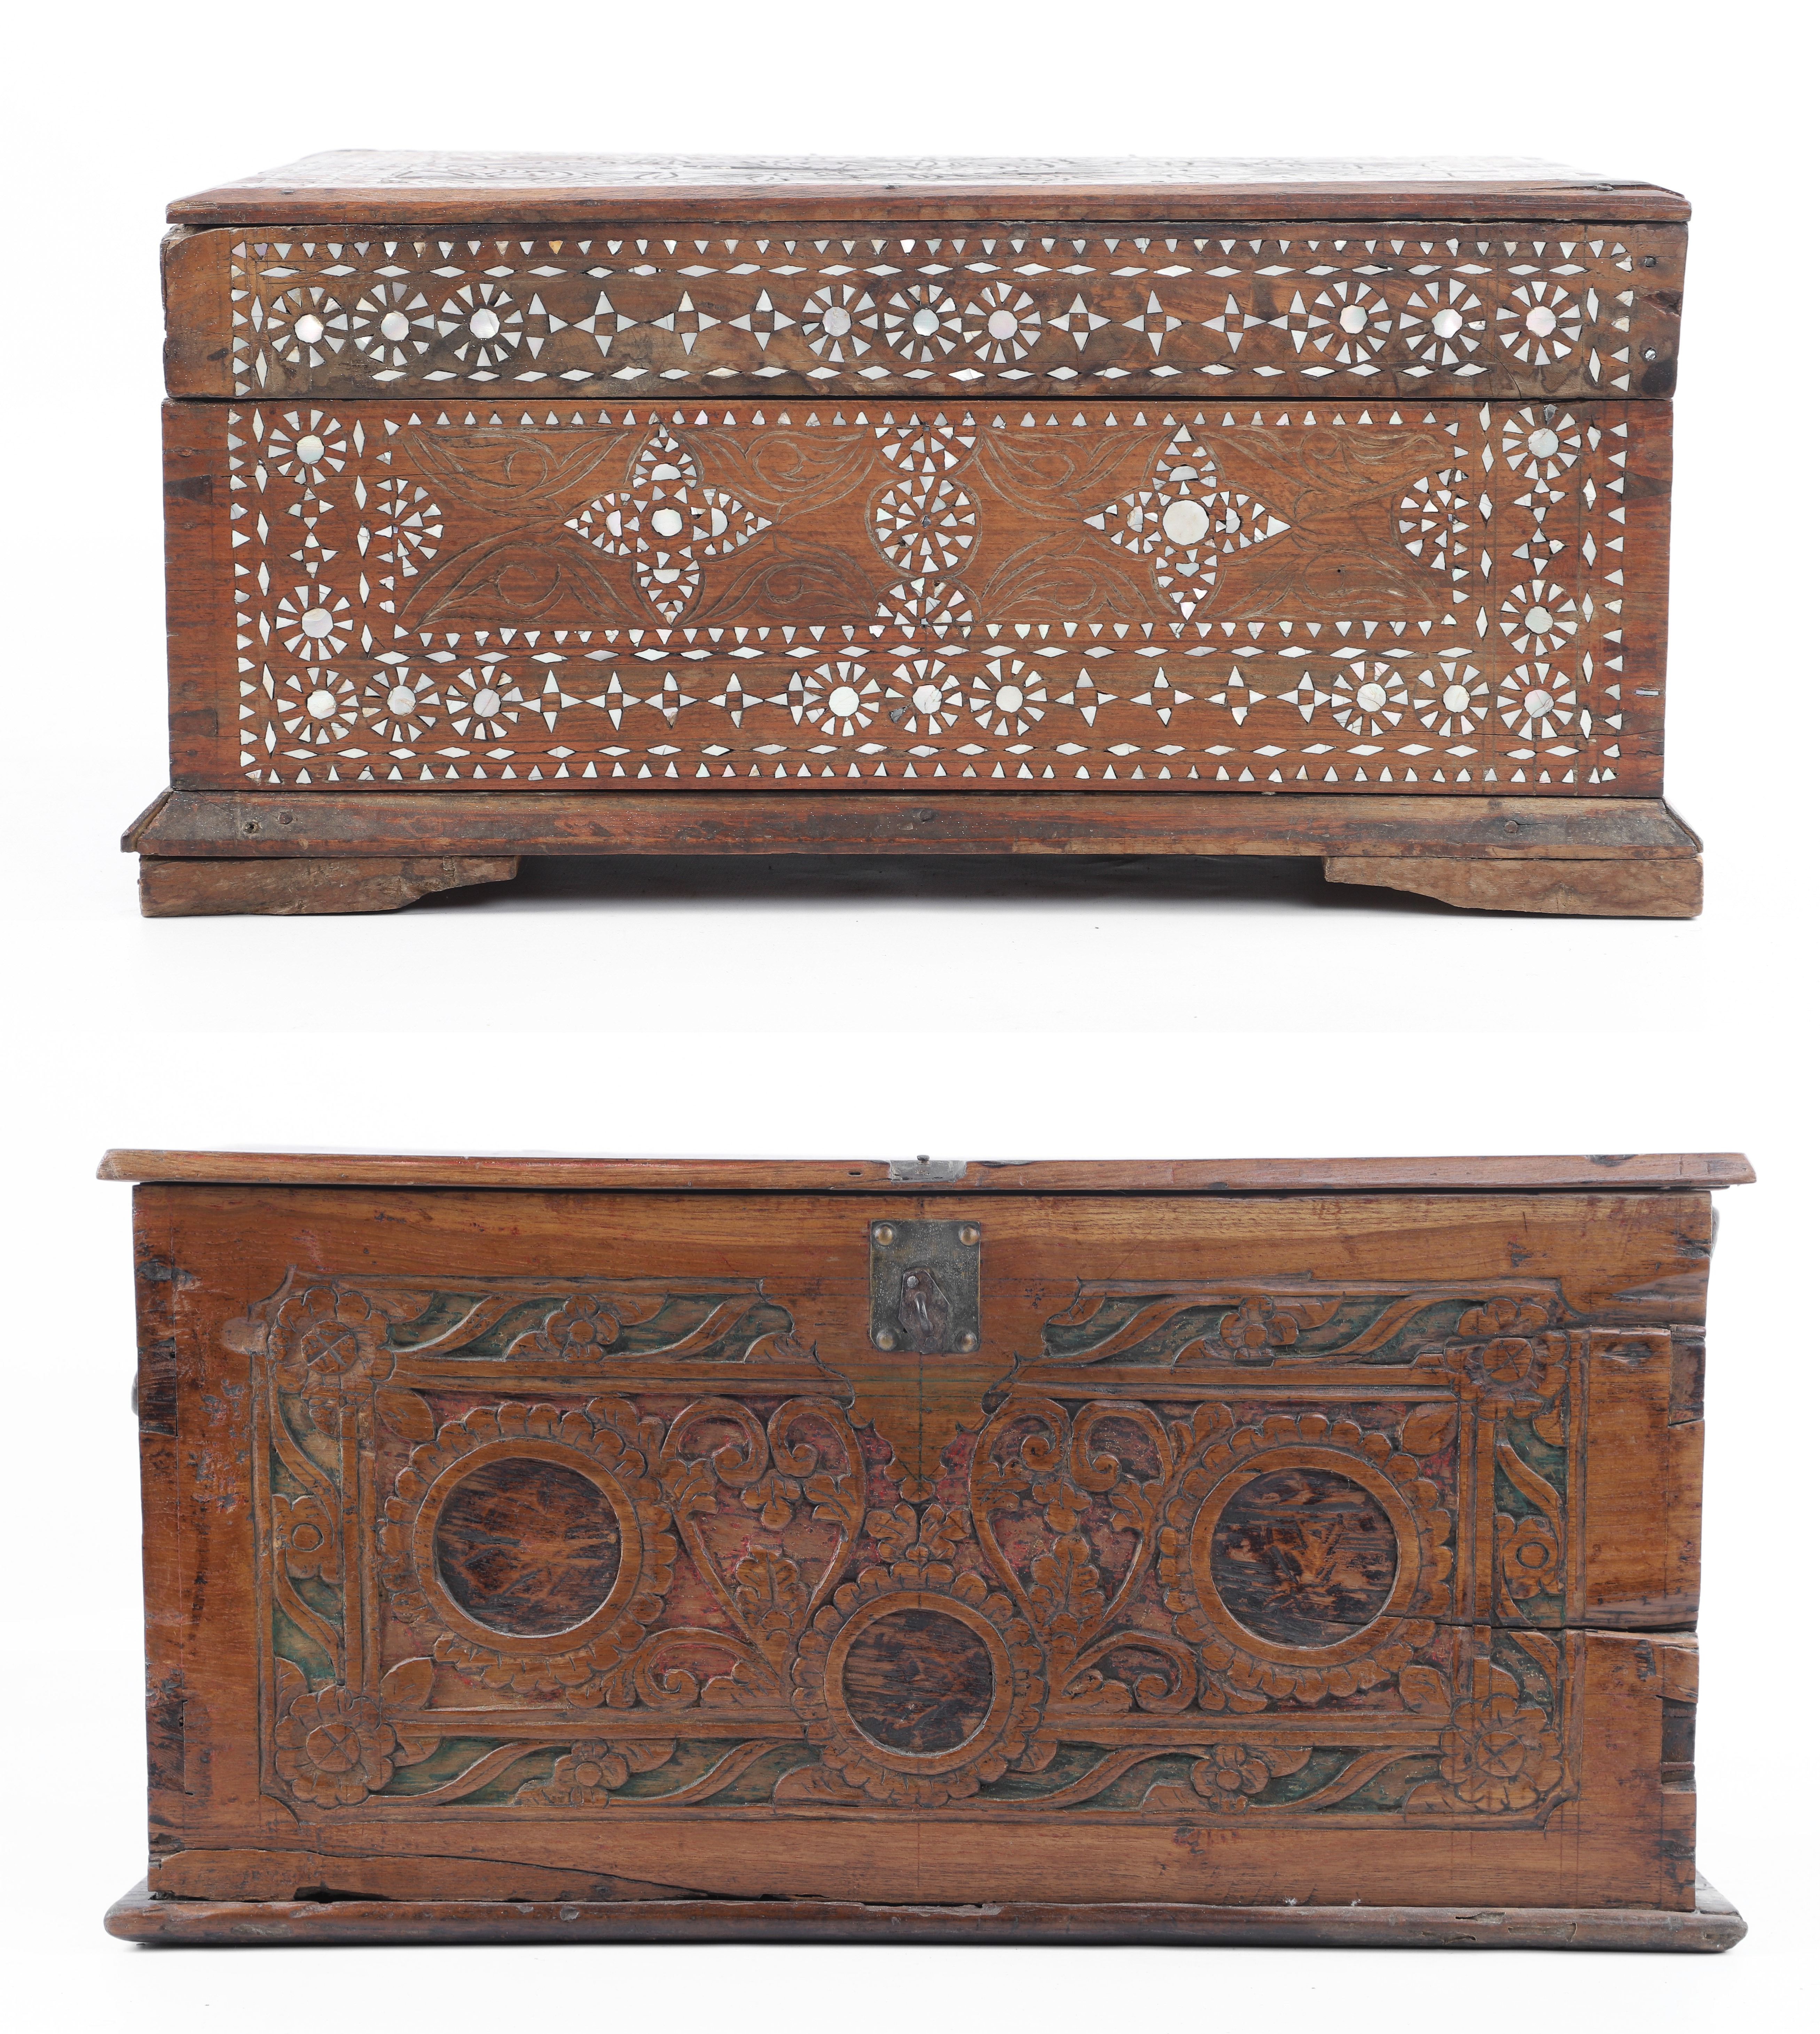 Carved and Inlaid trunk and covered